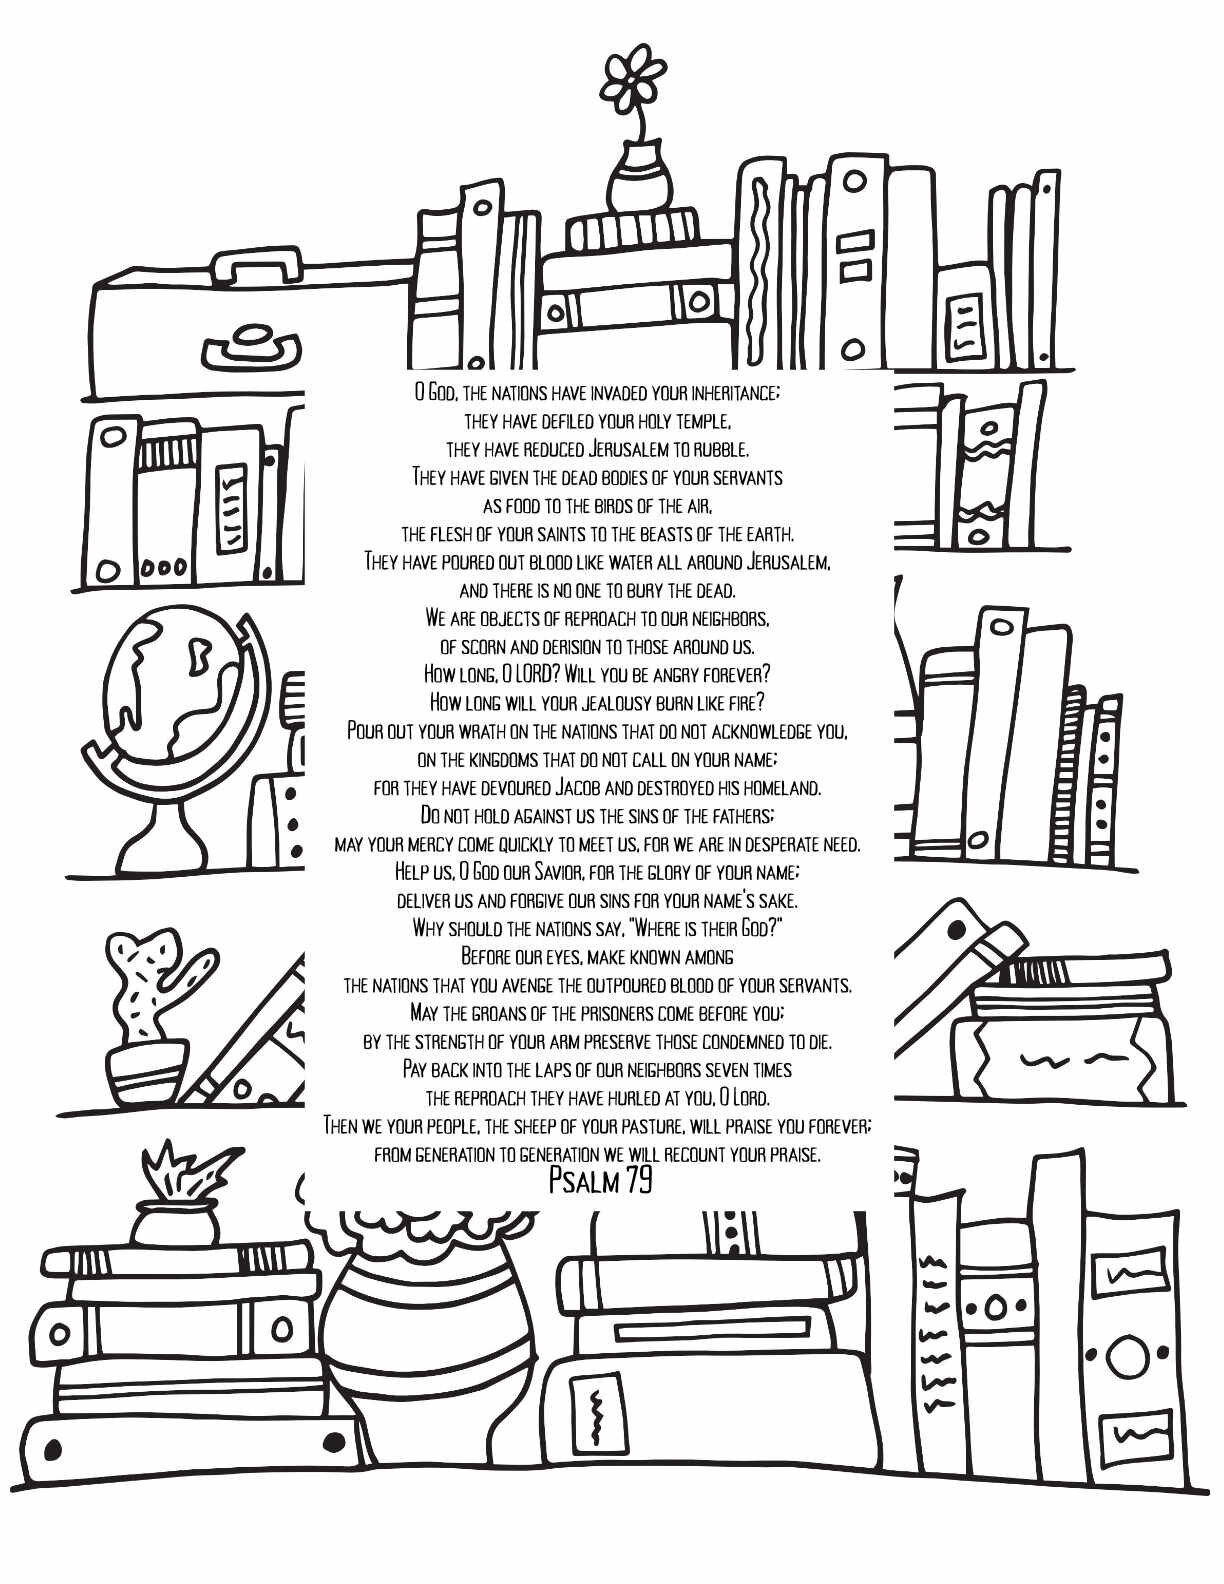 10 Free Printable Psalm Coloring Pages - Download and Color Adult Scripture - Psalm 79CLICK HERE TO DOWNLOAD THIS PAGE FREE